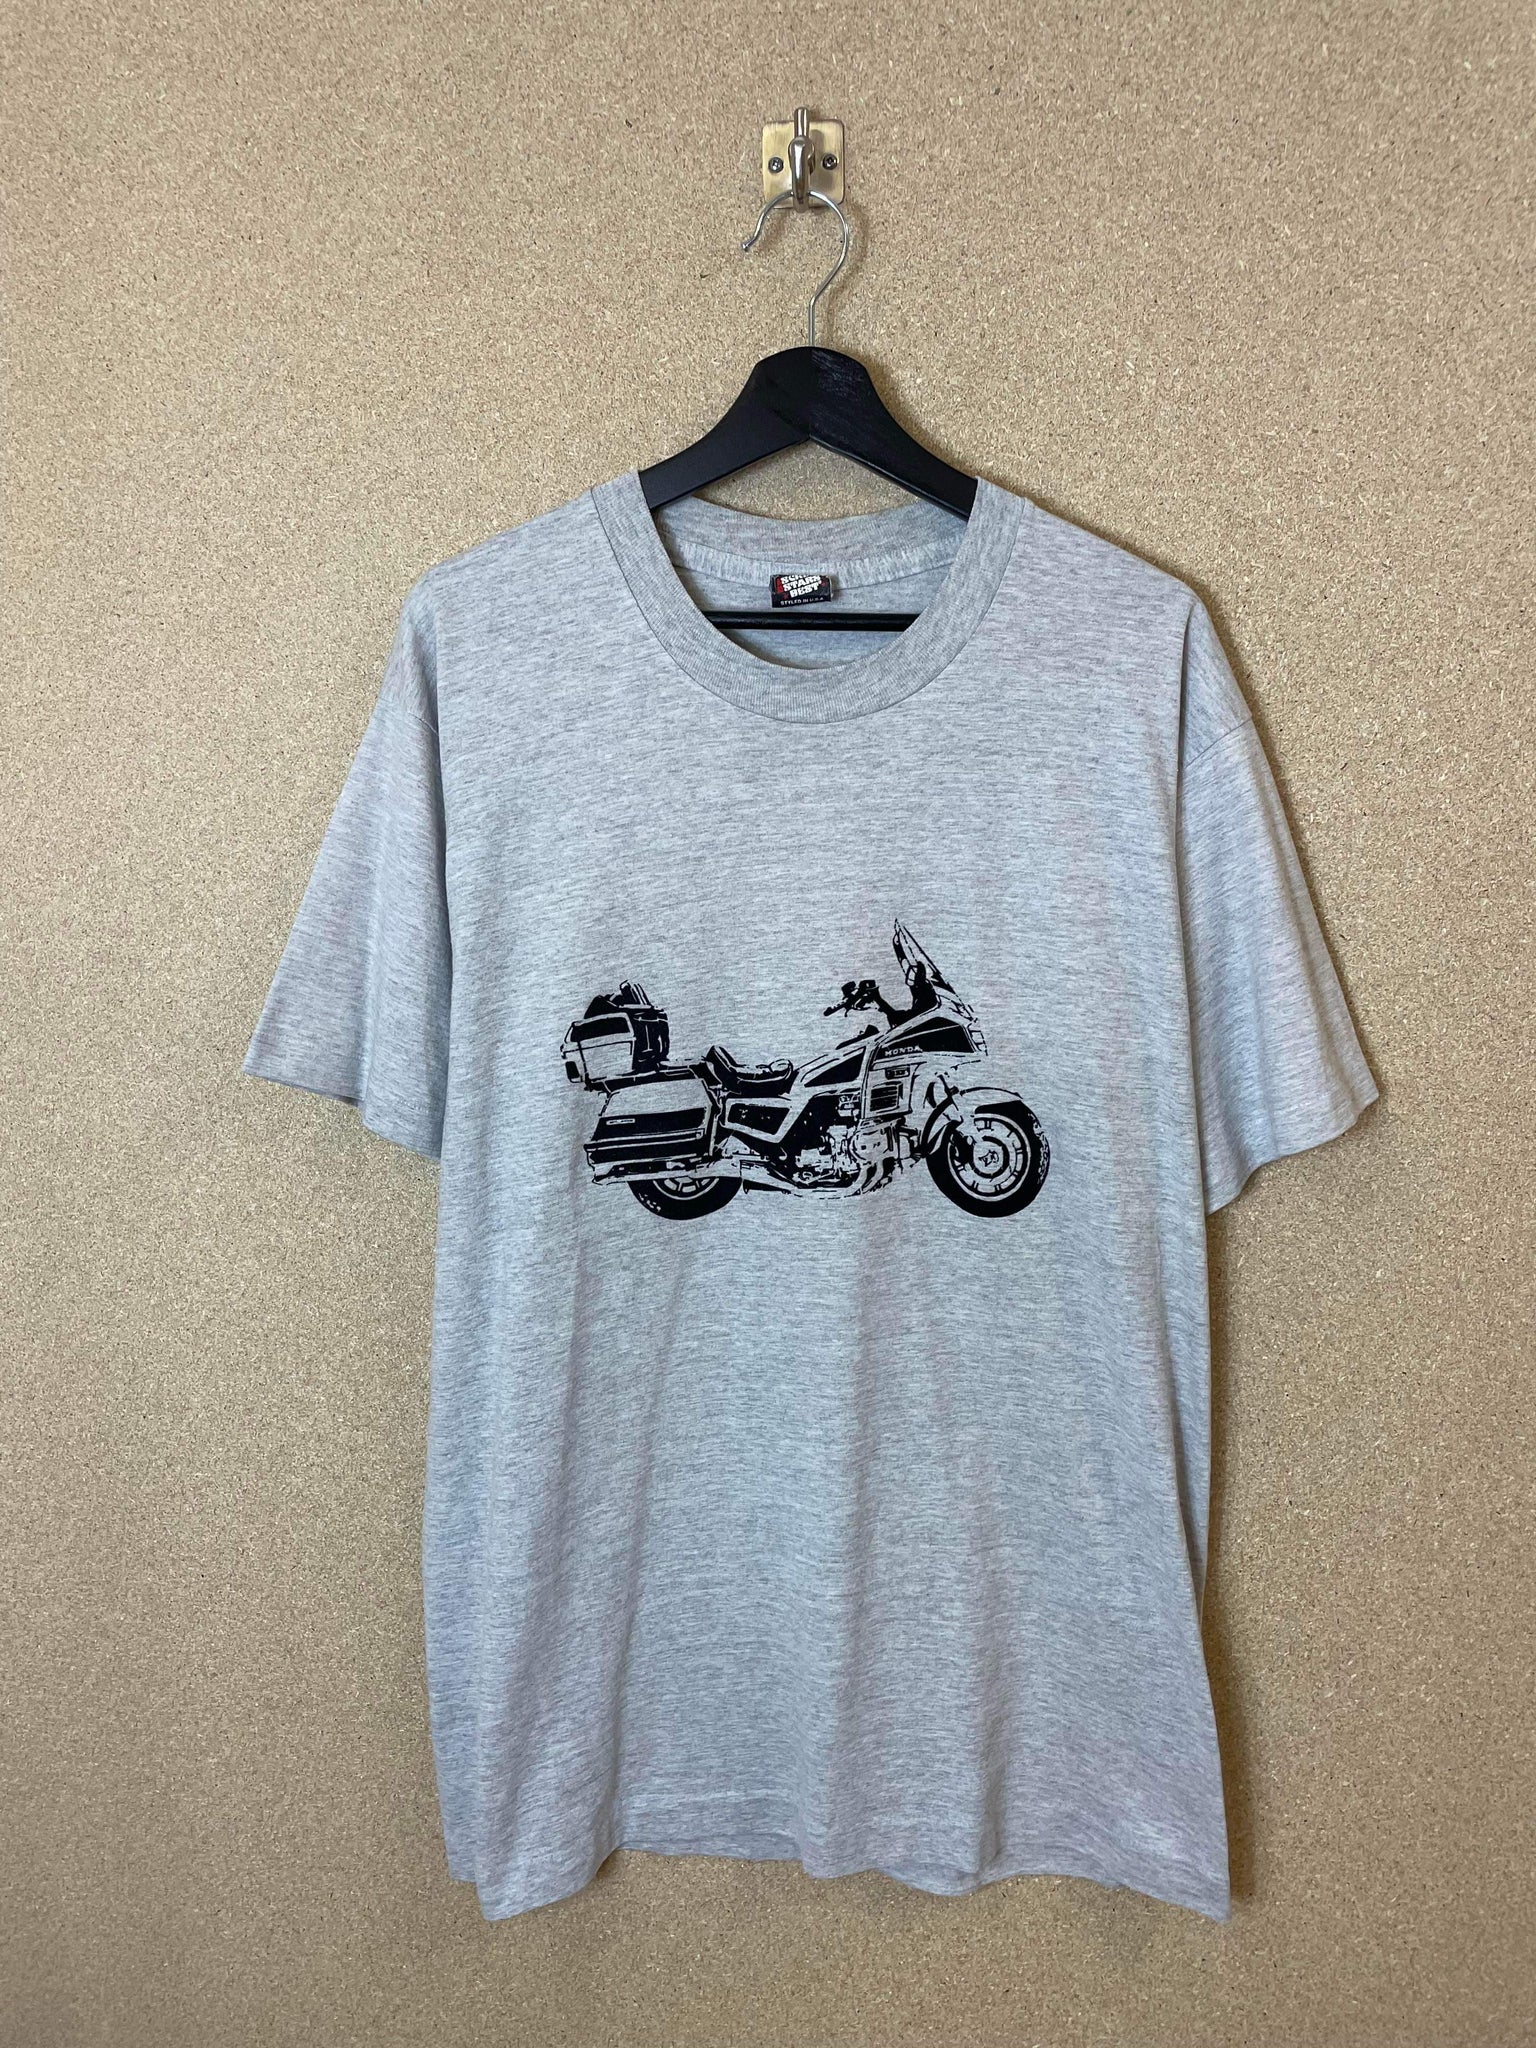 Vintage Goldwing Motor Cycles 90s Tee - XL